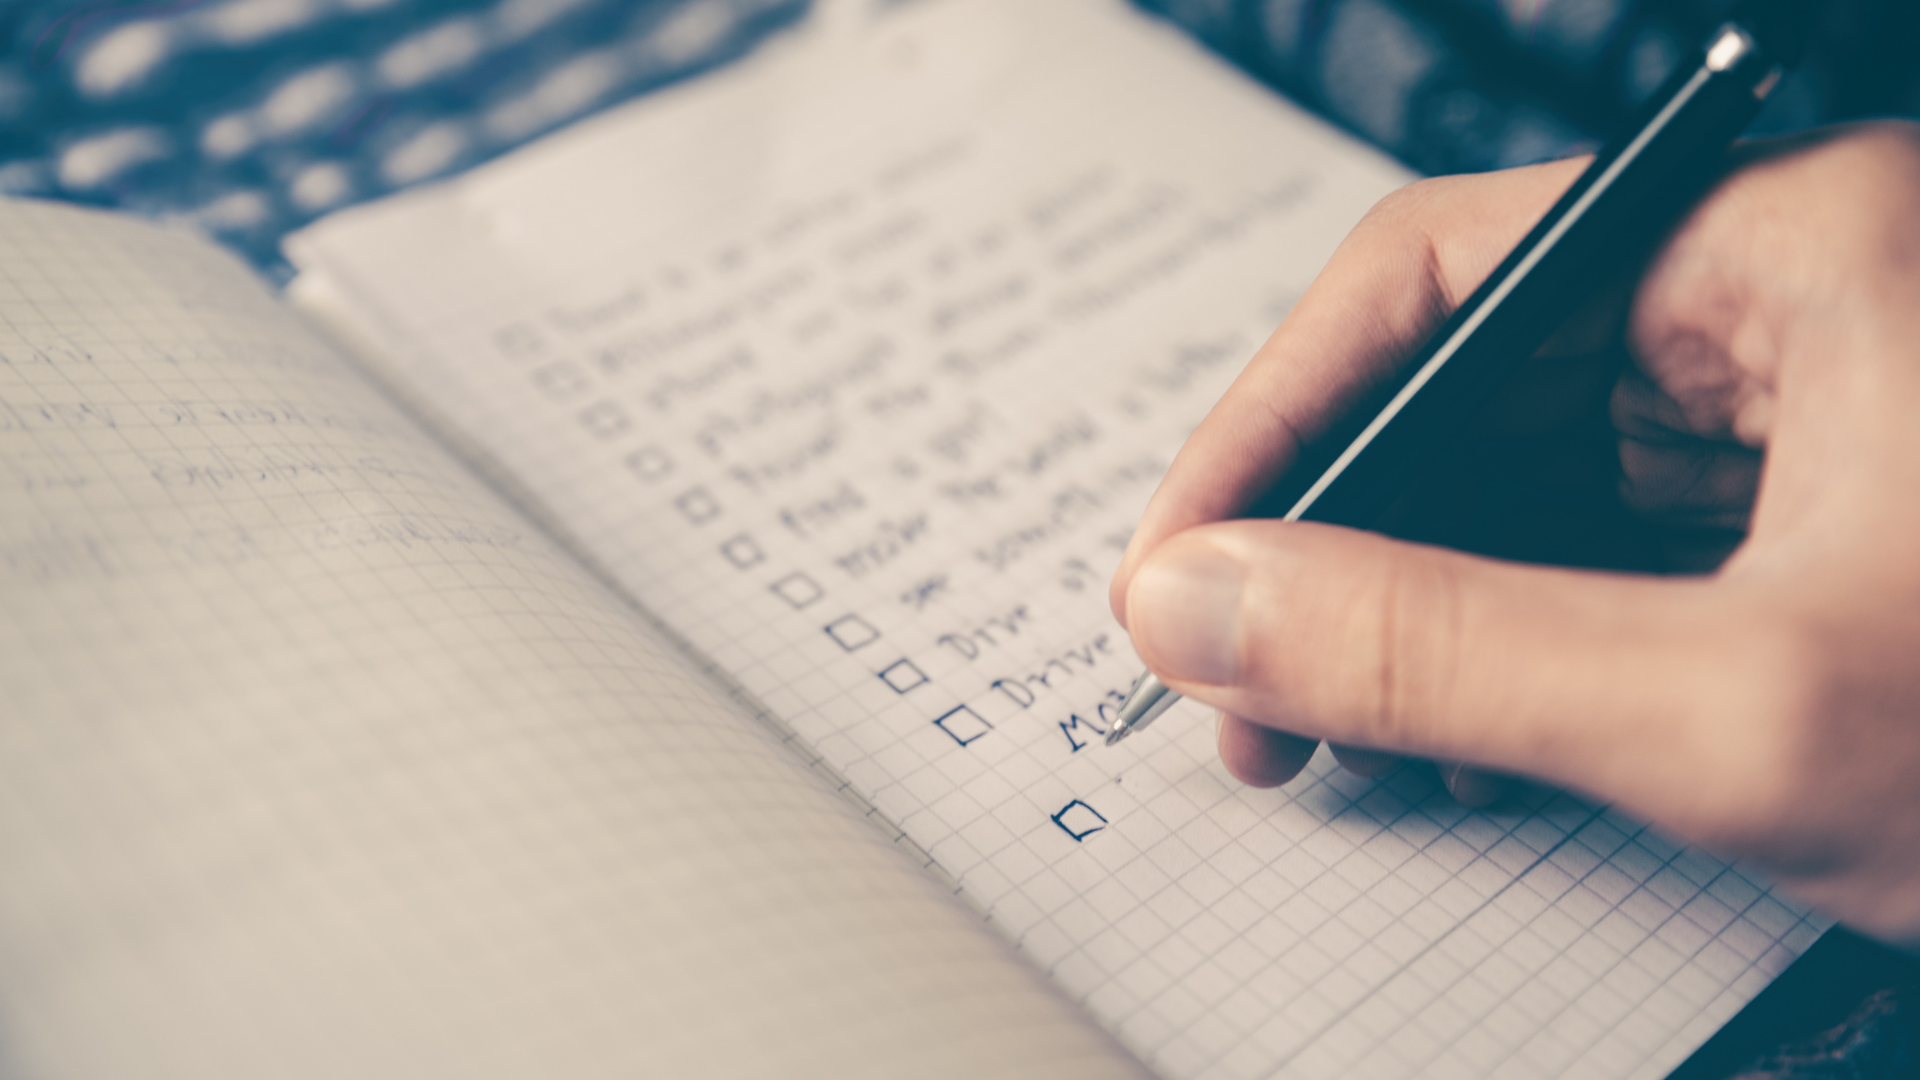 A Personal Growth Checklist To Help You Live A More Fulfilling Life